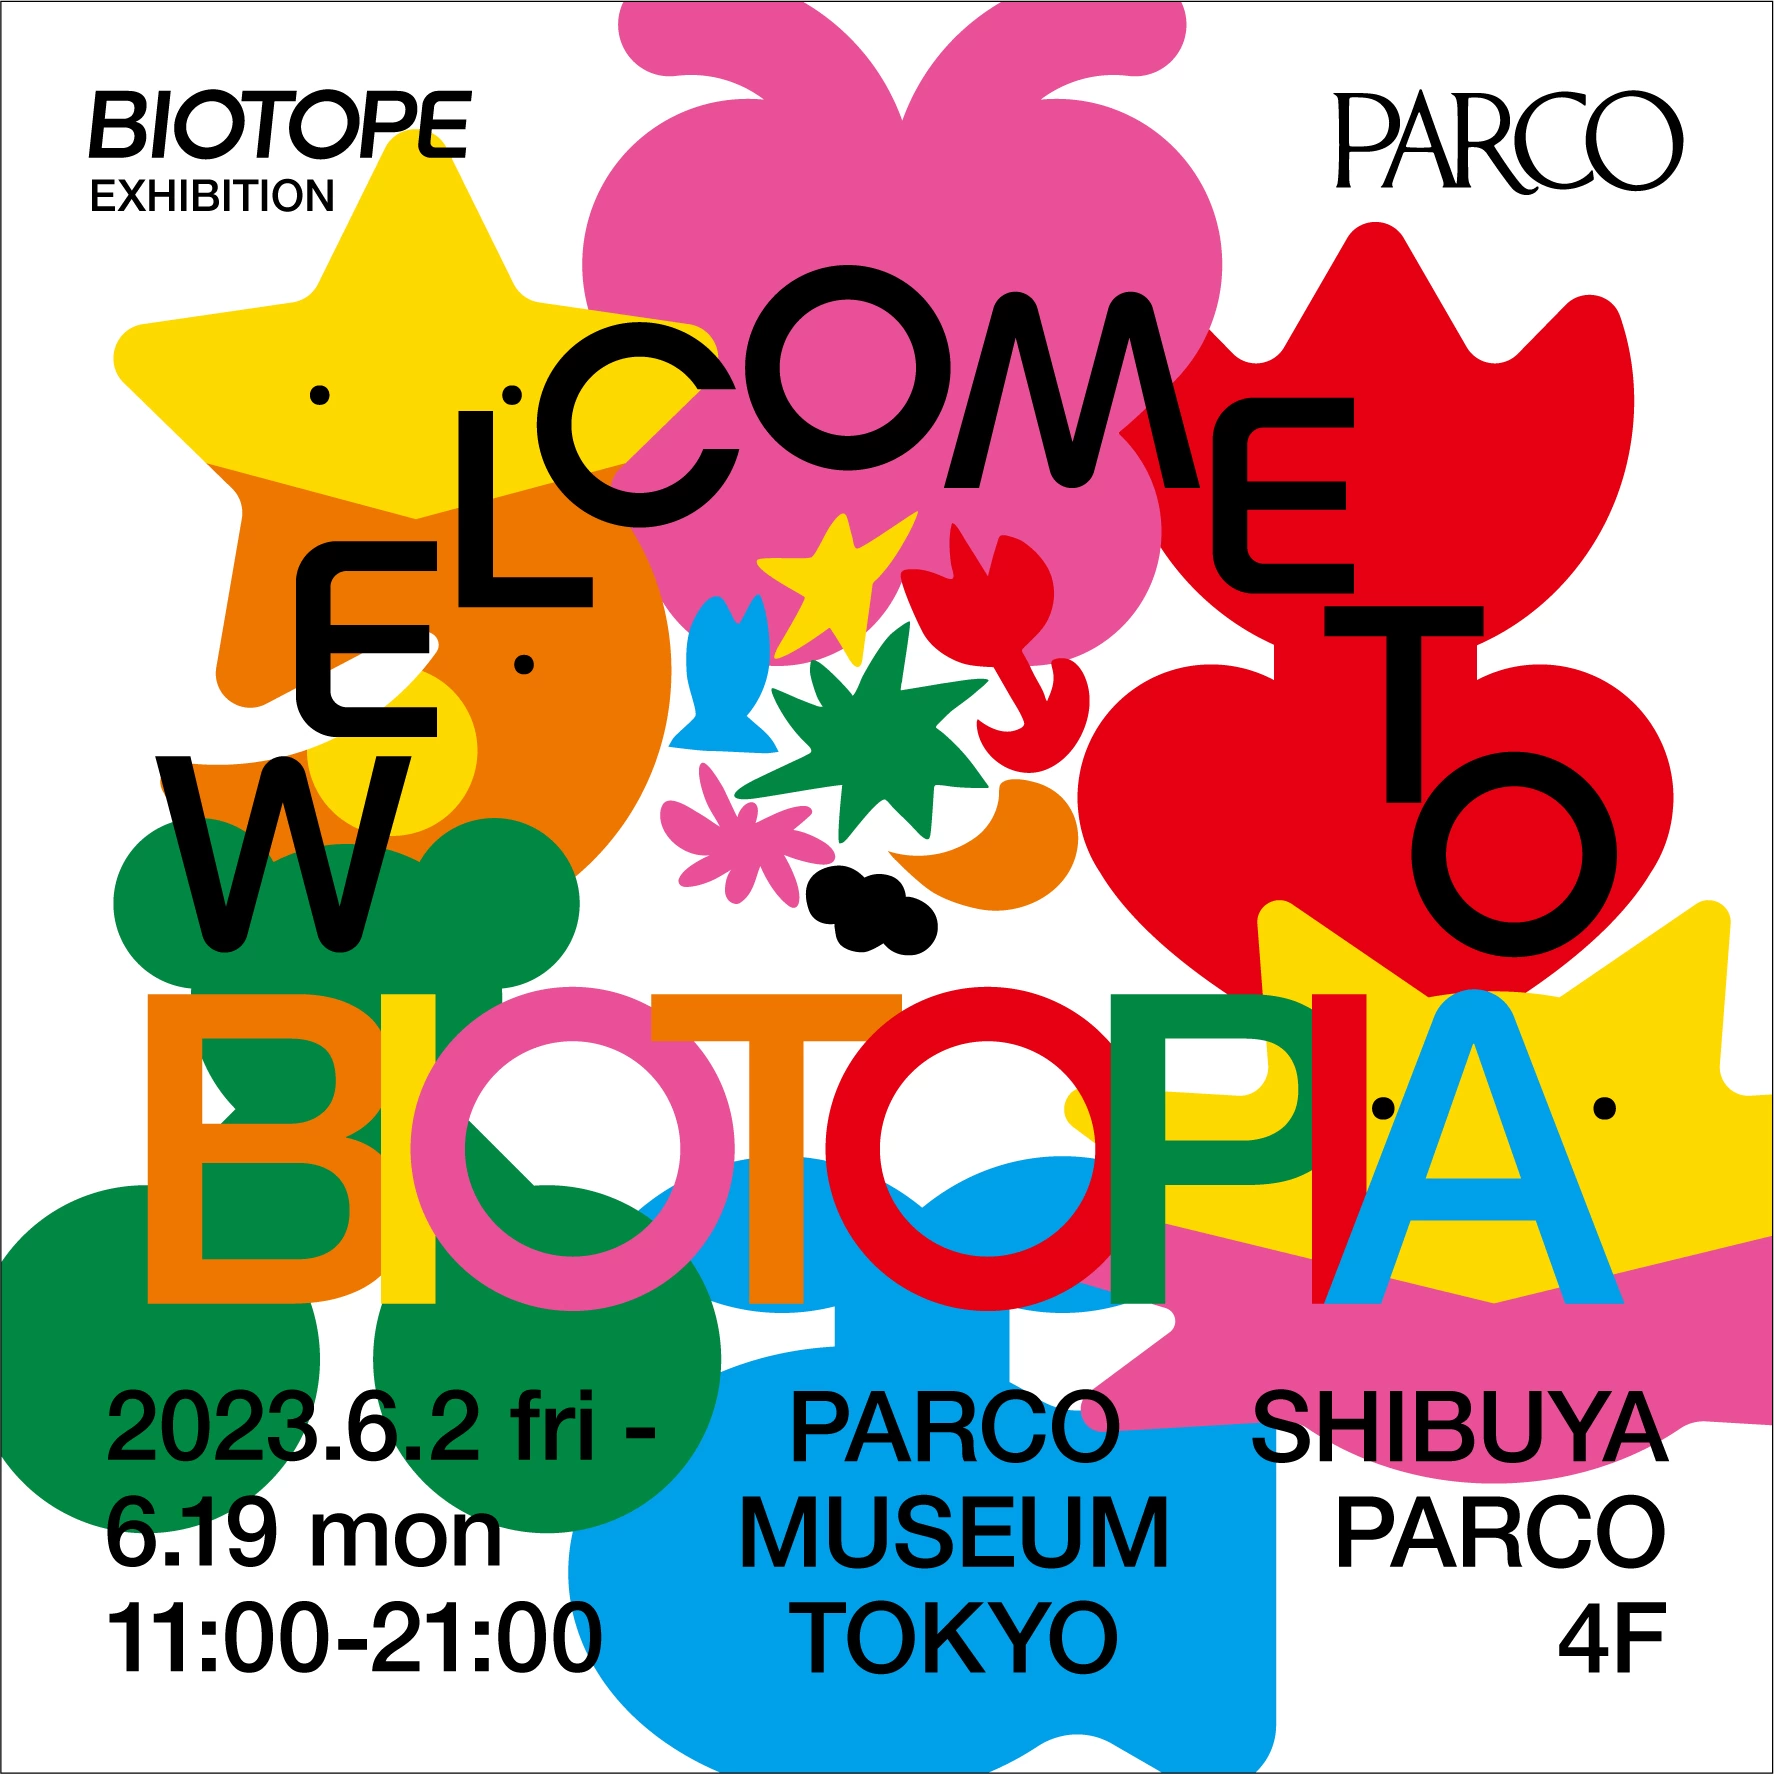 BIOTOPE展覧会「WELCOME TO BIOTOPIA」